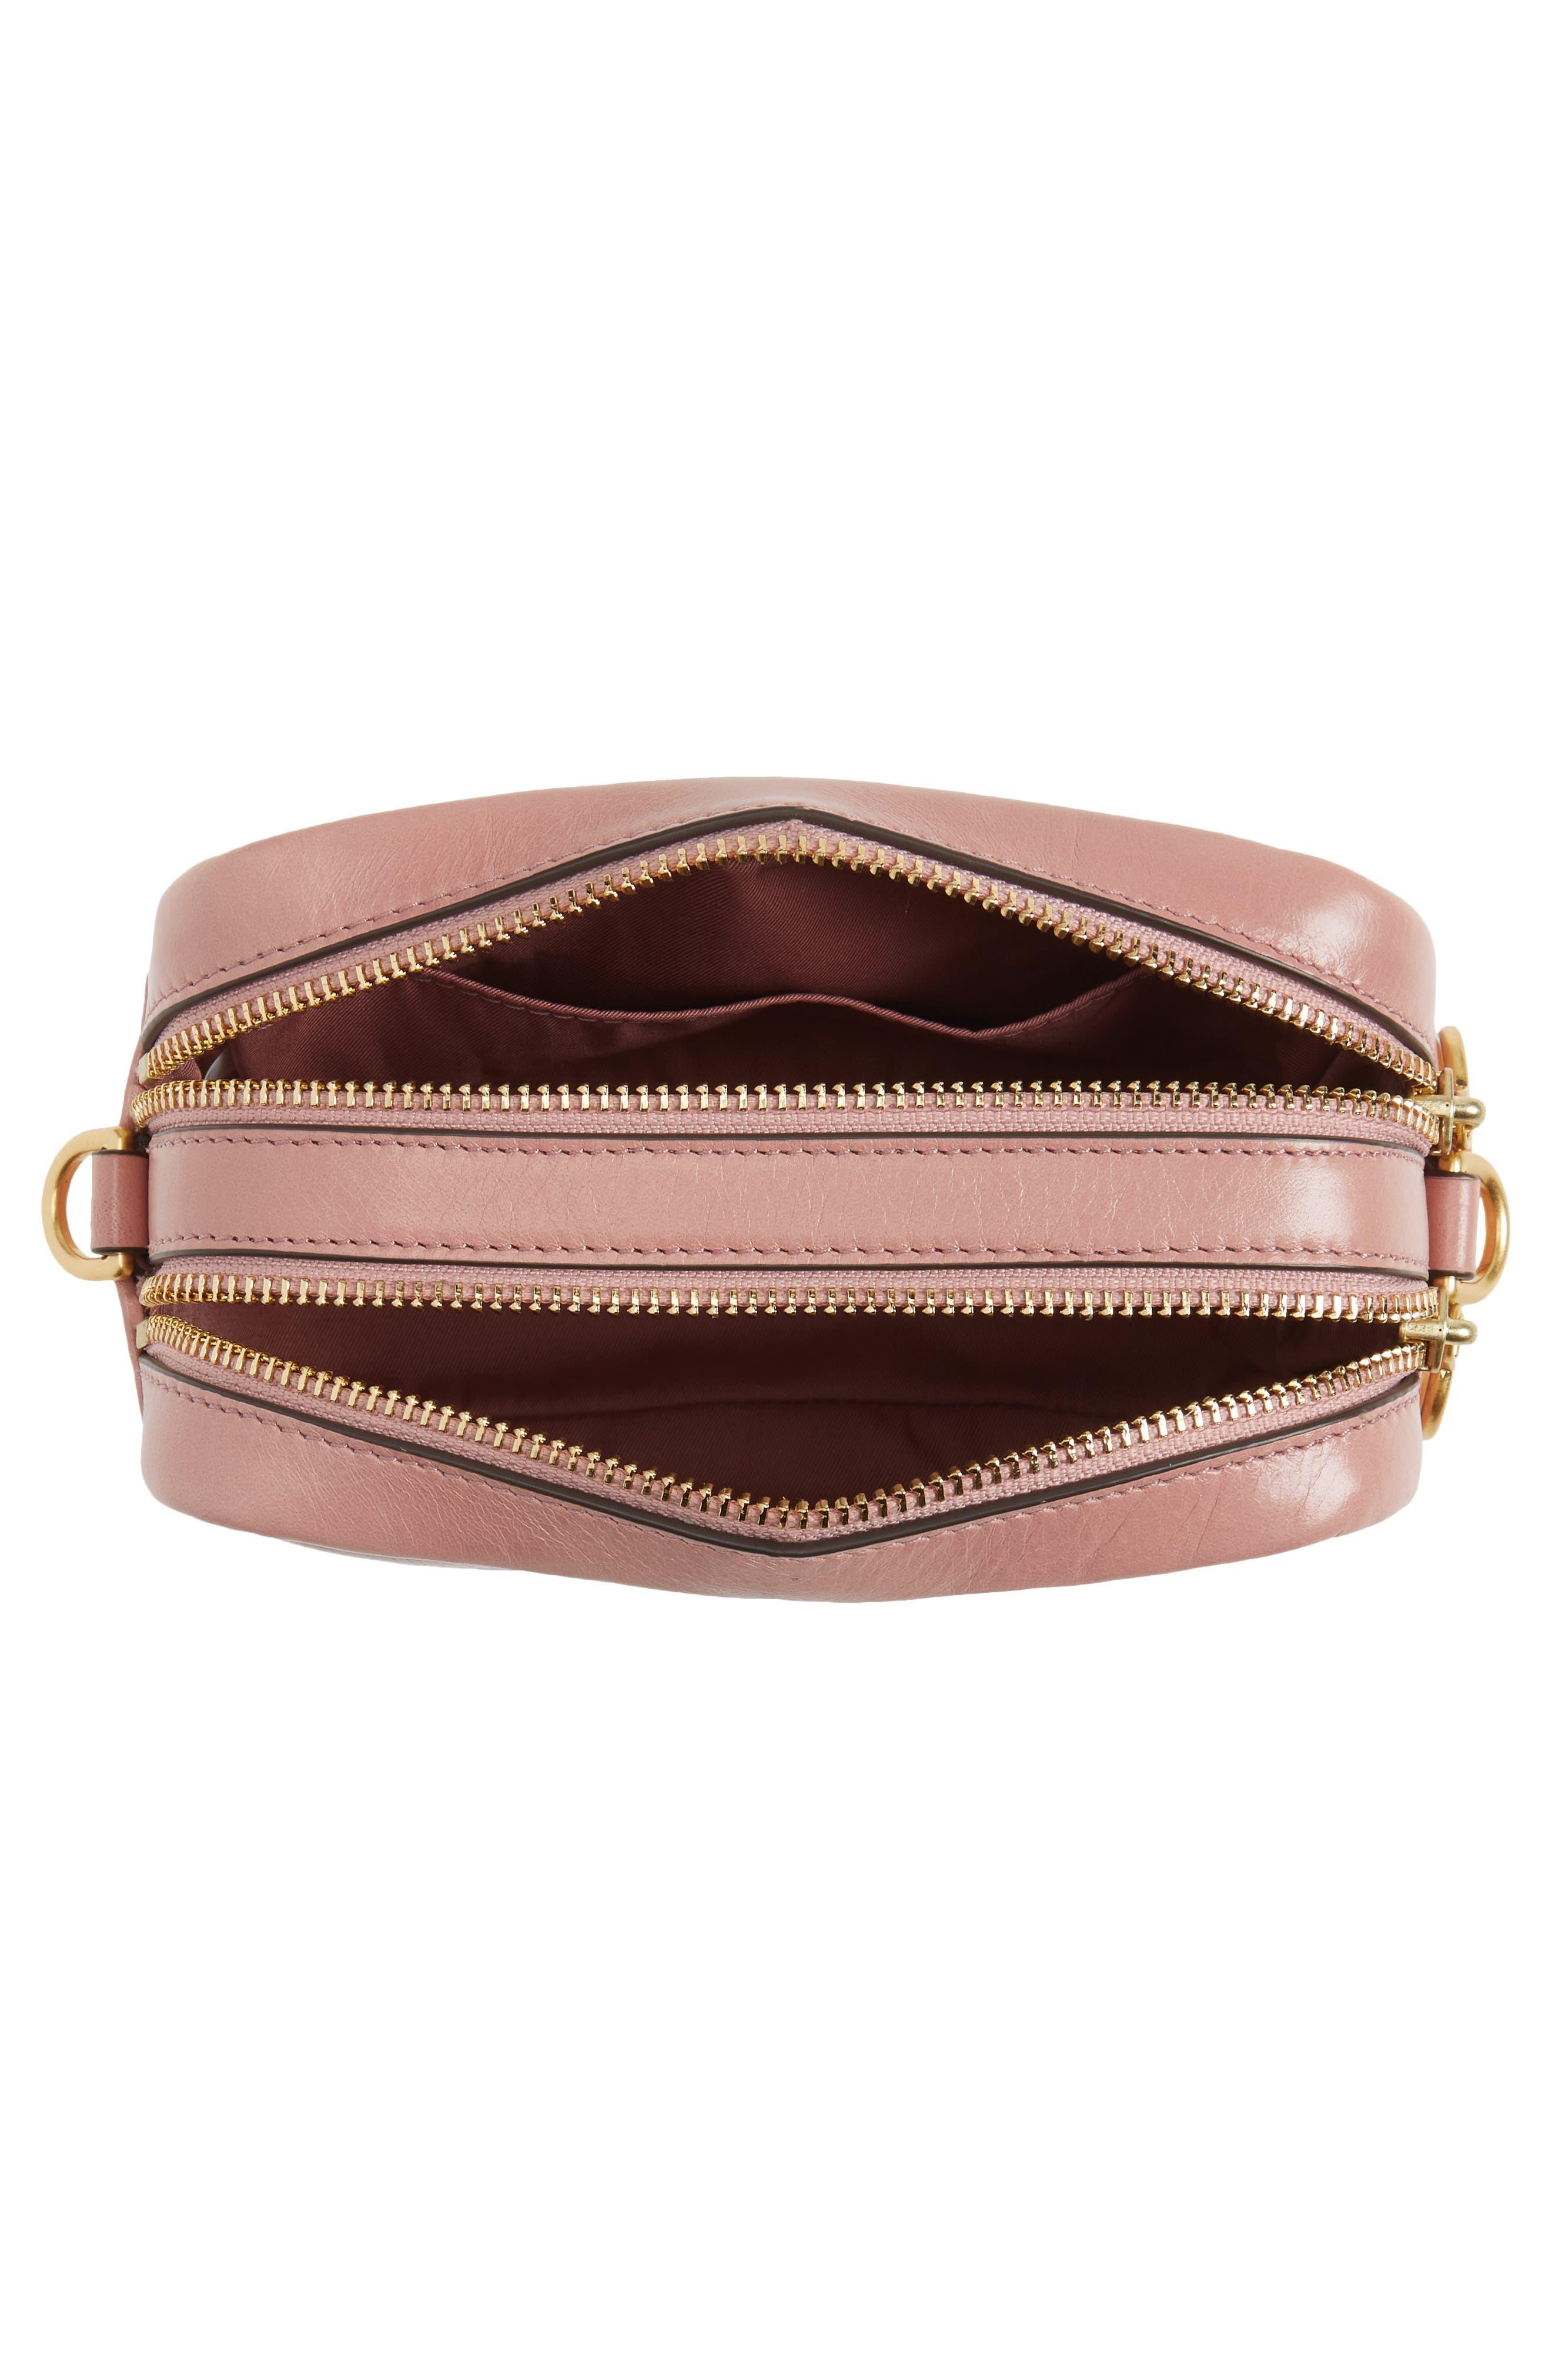 TORY BURCH: shoulder bag in textured leather with emblem - Pink